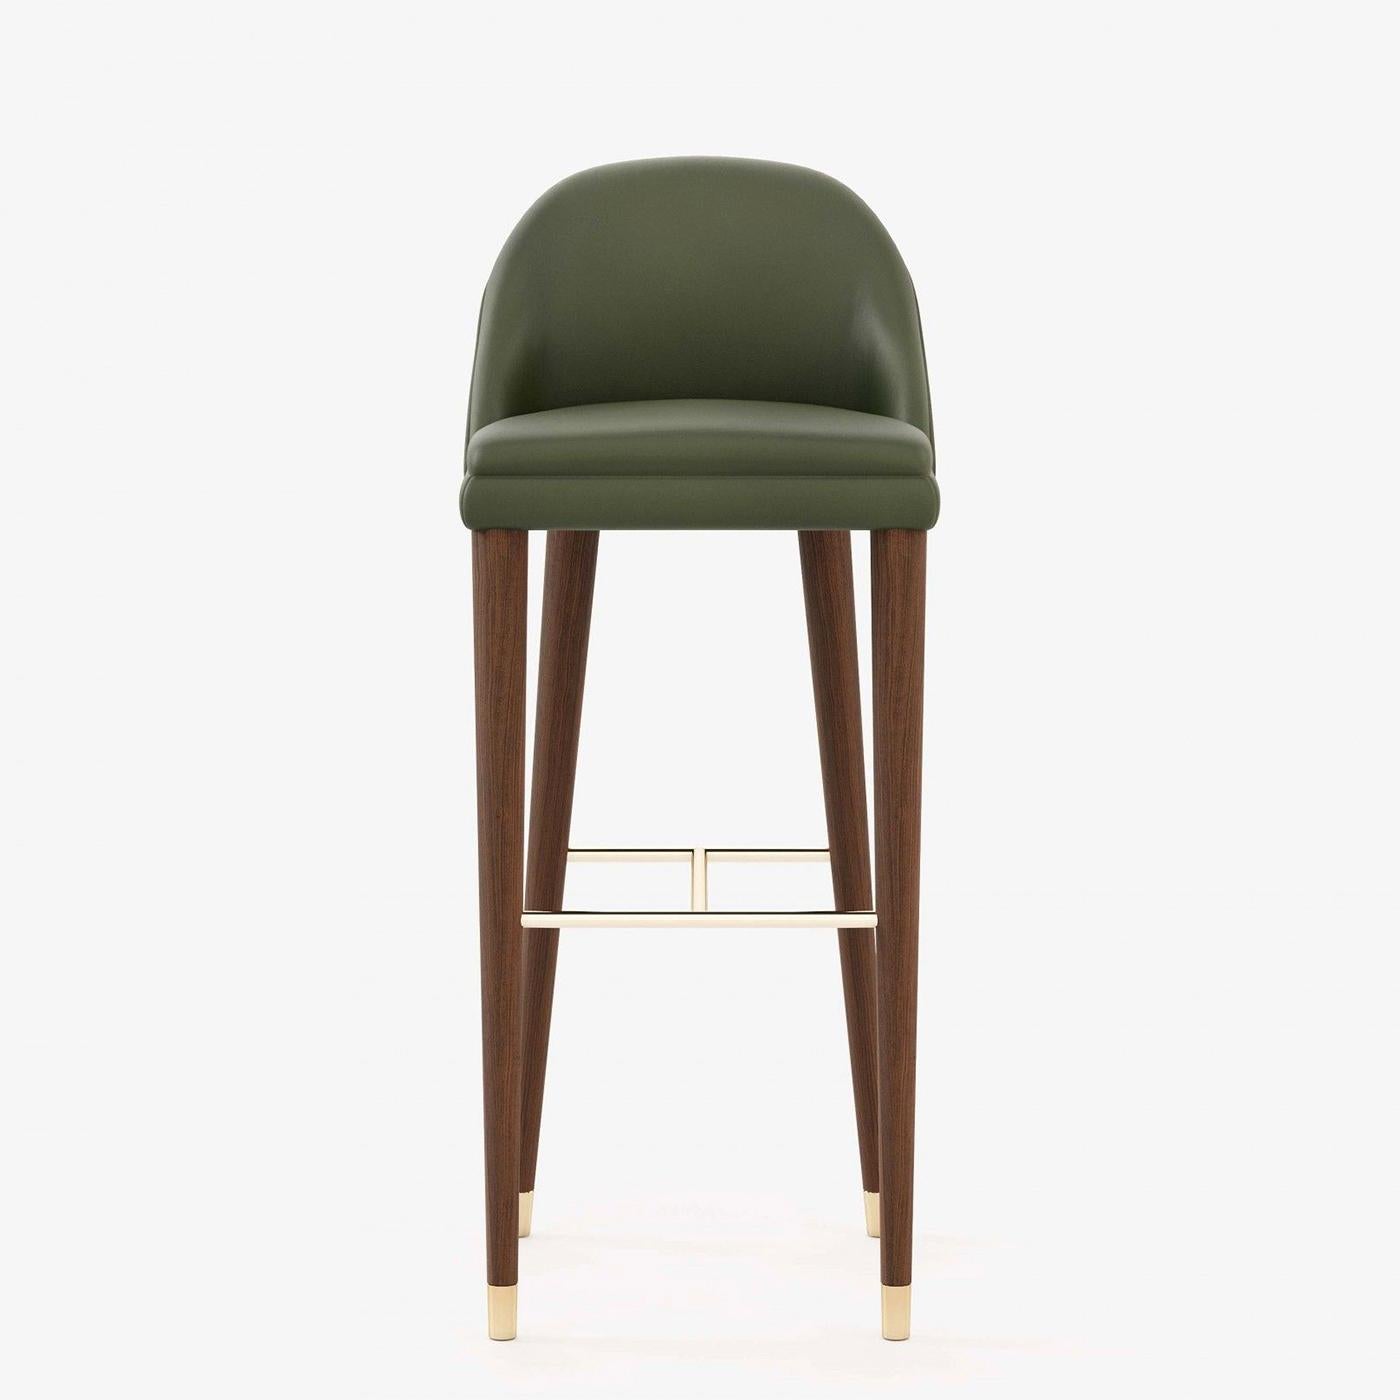 Loanne High Bar Stool with wooden feet in walnut matte finish and 
with polished stainless steel footrests in gold finish, feet at the bottom
of the legs in polished stainless steel in gold finish. Upholstered
and covered with green genuine